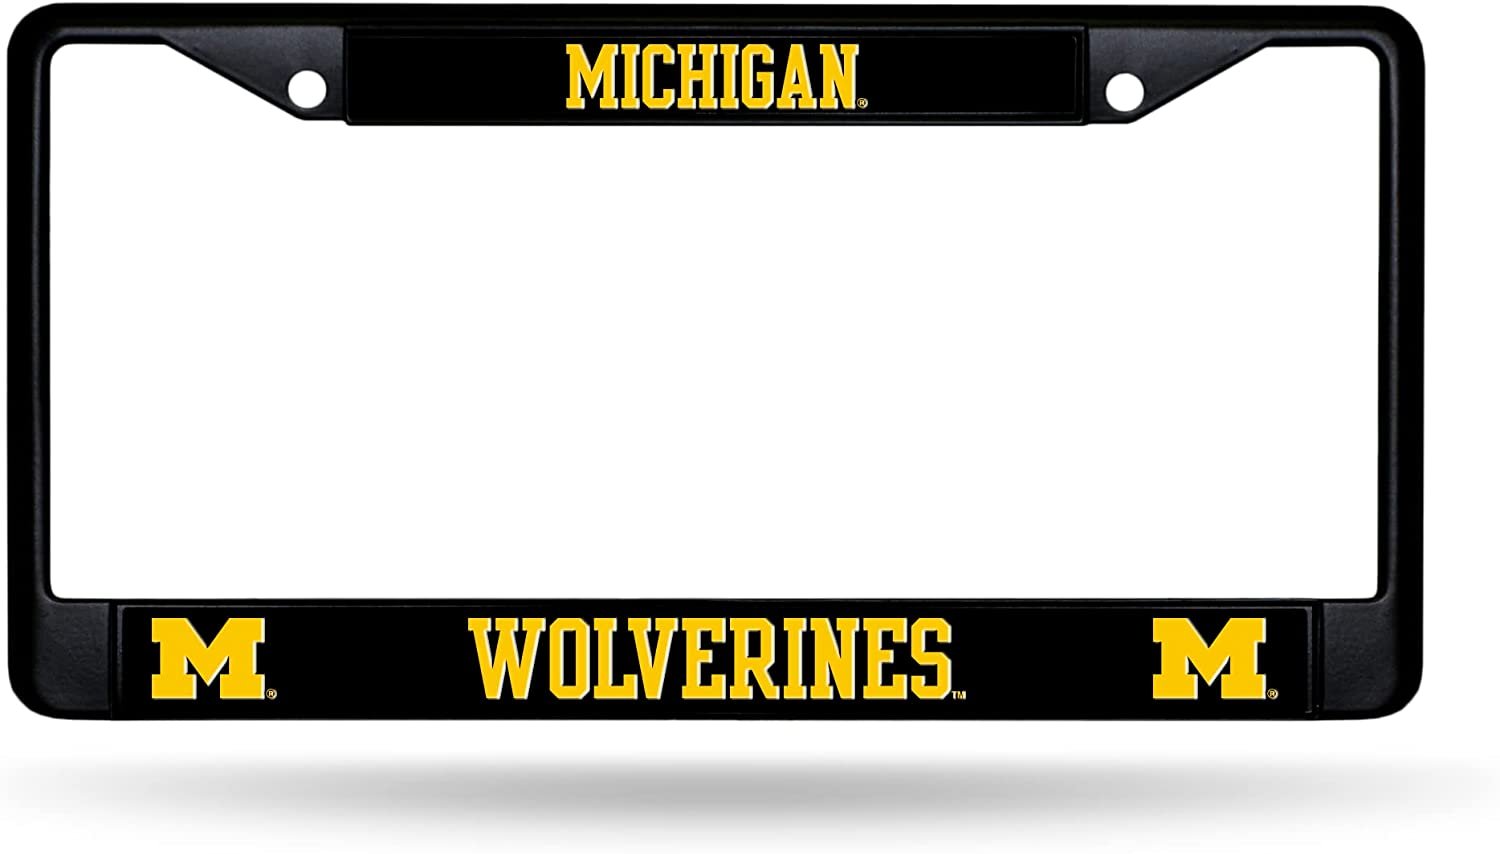 University of Michigan Wolverines Black Metal License Plate Frame Chrome Tag Cover 6x12 Inch